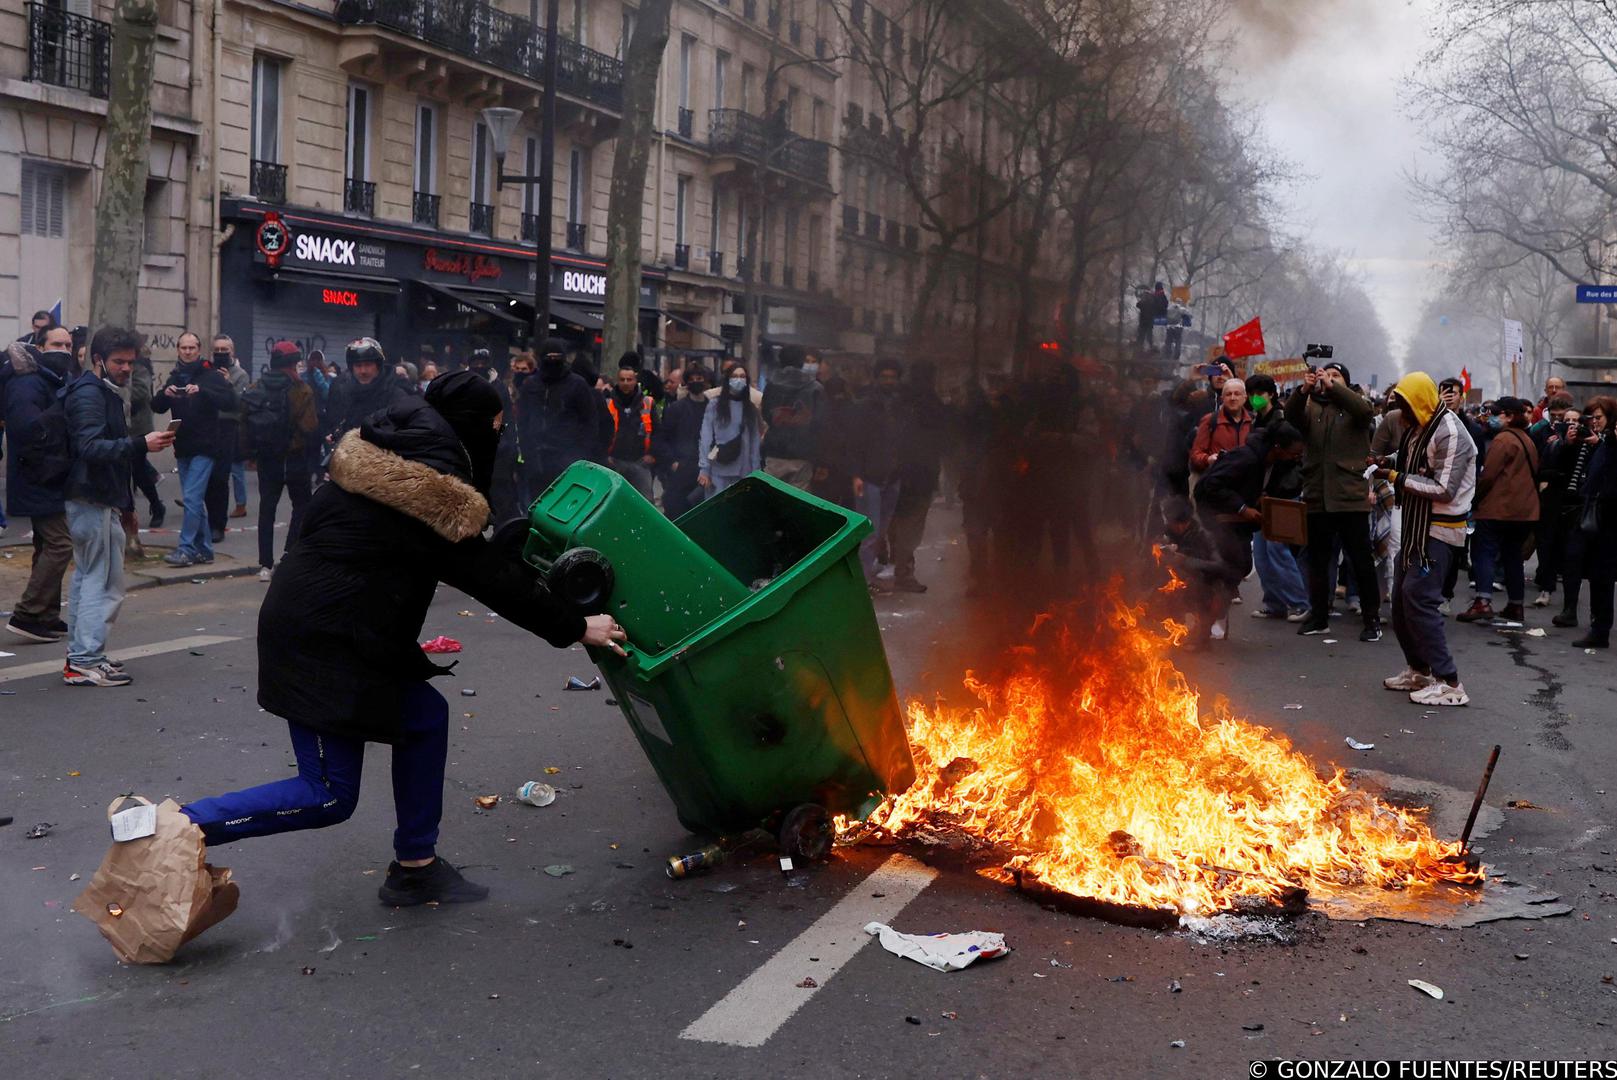 A protester sets a garbage bin on fire during clashes at a demonstration as part of the tenth day of nationwide strikes and protests against French government's pension reform, in Paris, France, March 28, 2023. REUTERS/Gonzalo Fuentes Photo: GONZALO FUENTES/REUTERS